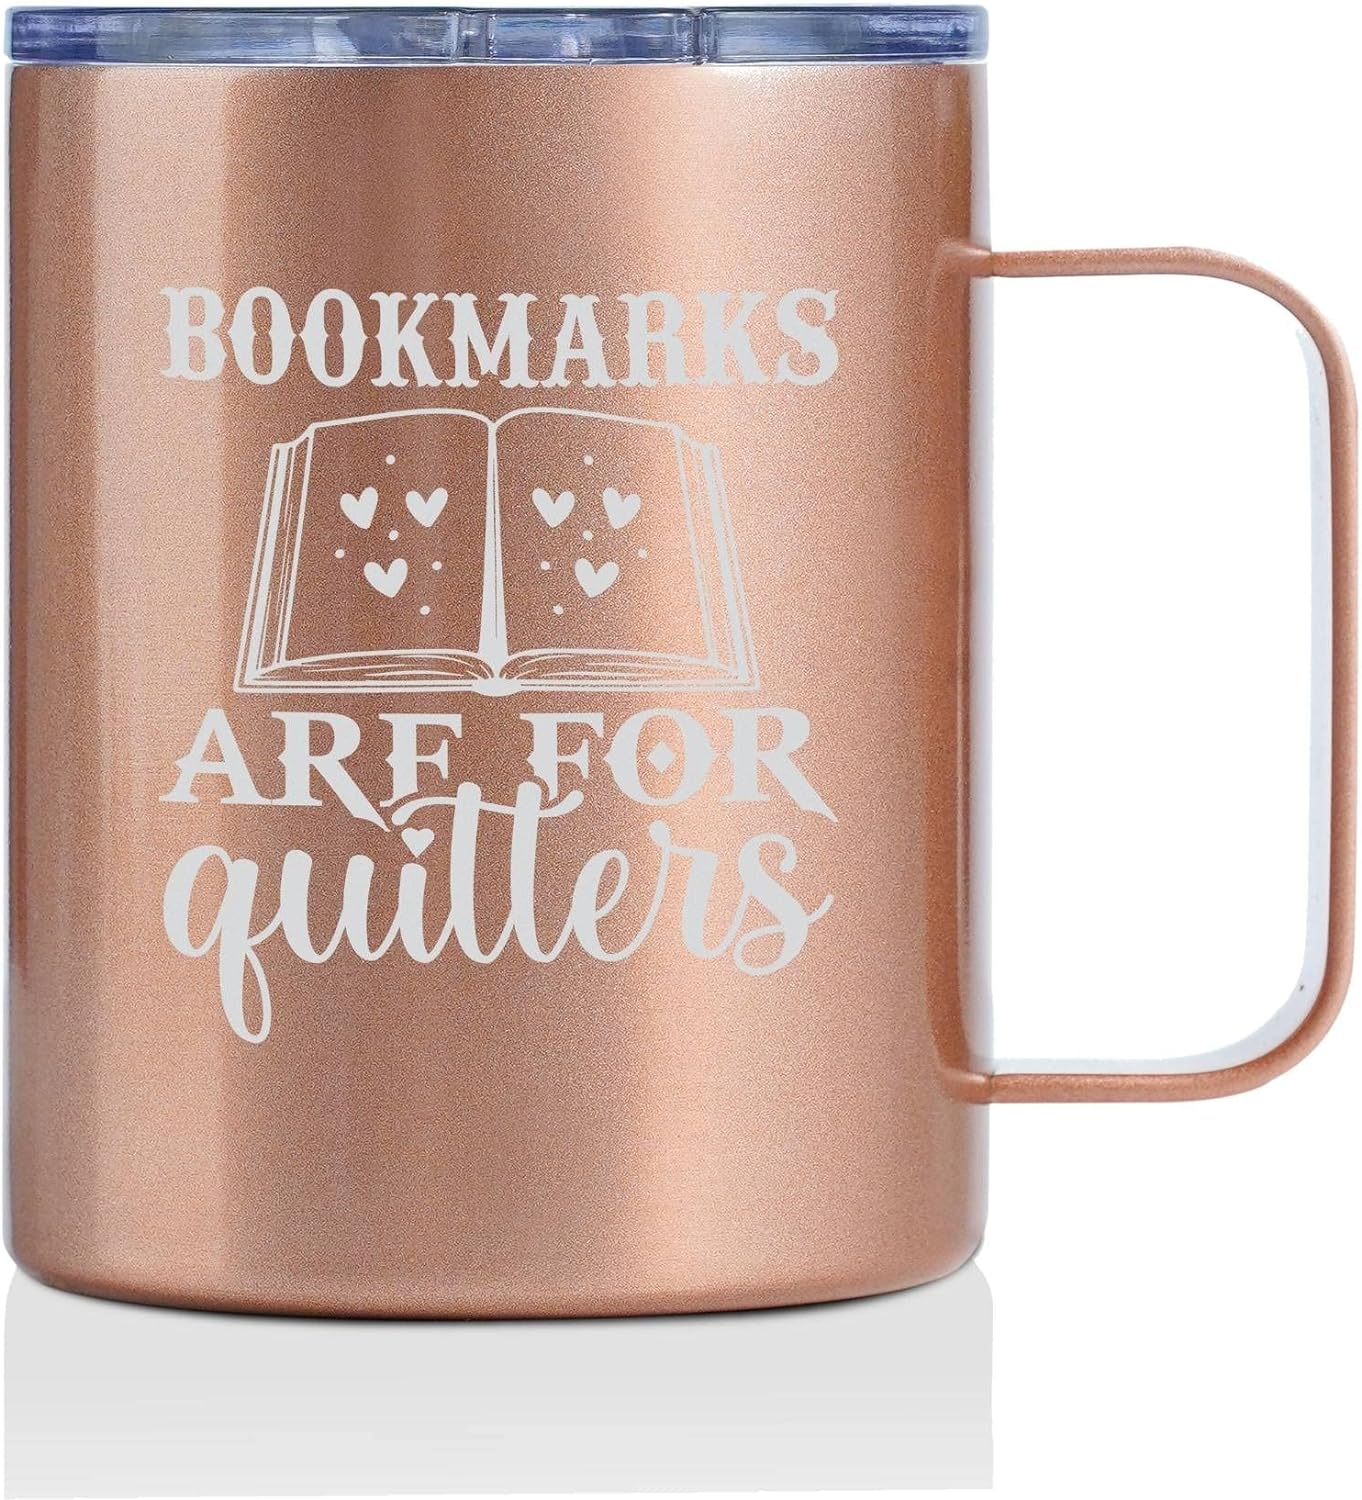 Book Lovers Gifts for Women, Female, Her - Bookmarks are for Quitters - 12 oz /350 ml Insulated Mugs with Lid for Book Club, Librarians, Readers